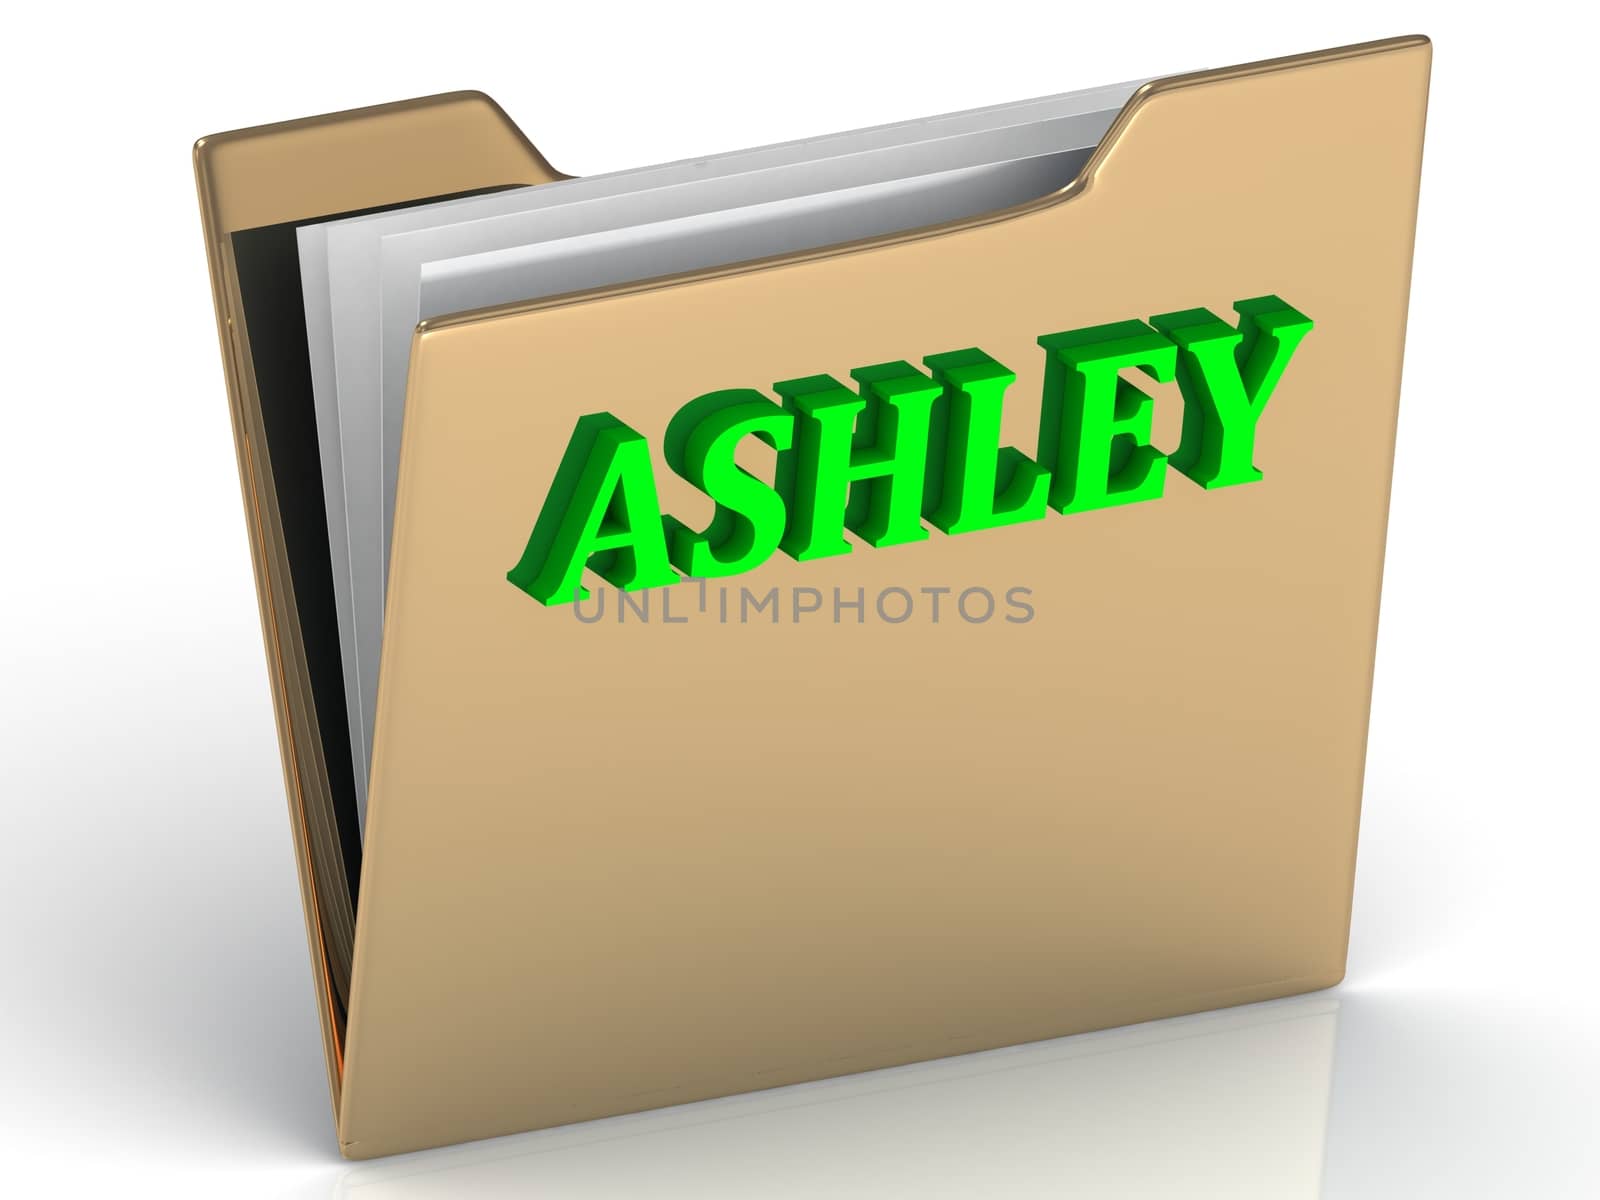 ASHLEY- bright green letters on gold paperwork folder on a white background